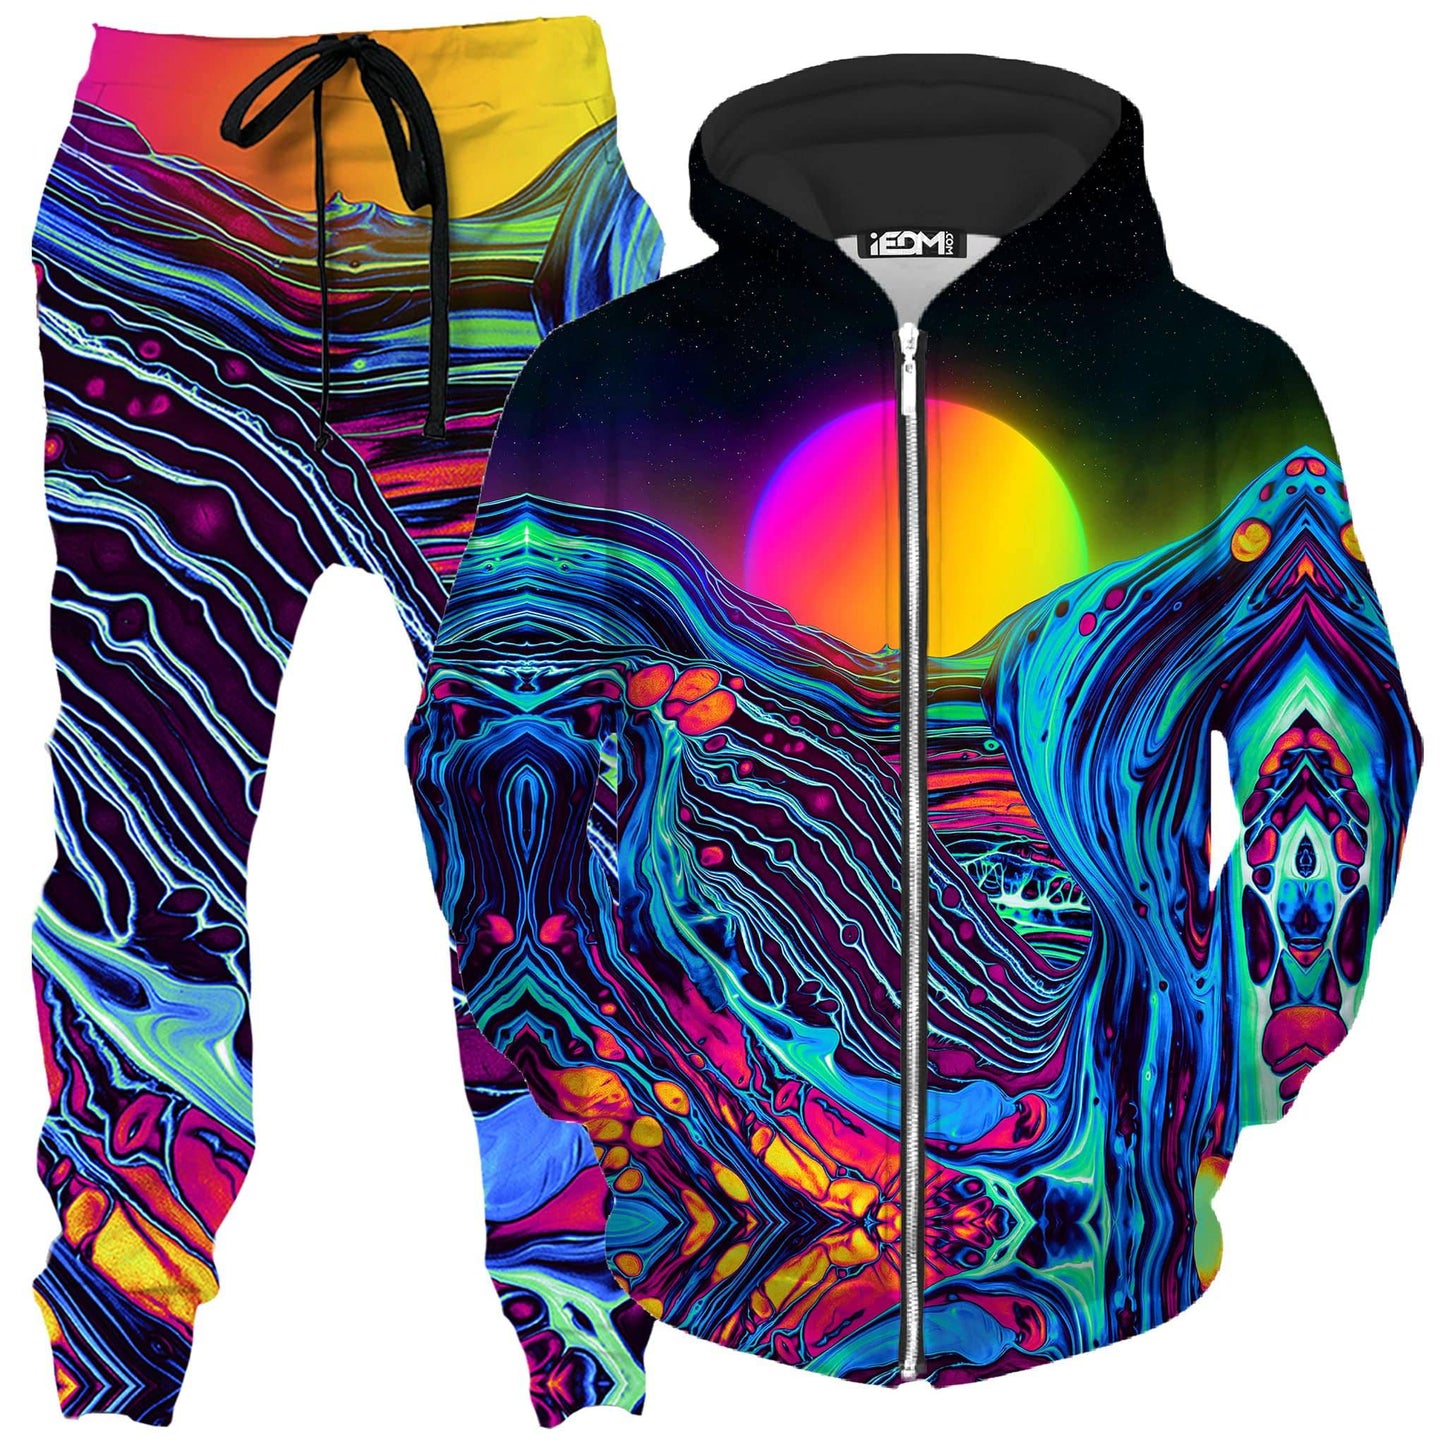 Dose of Sunset Zip-Up Hoodie and Joggers Combo, Noctum X Truth, | iEDM